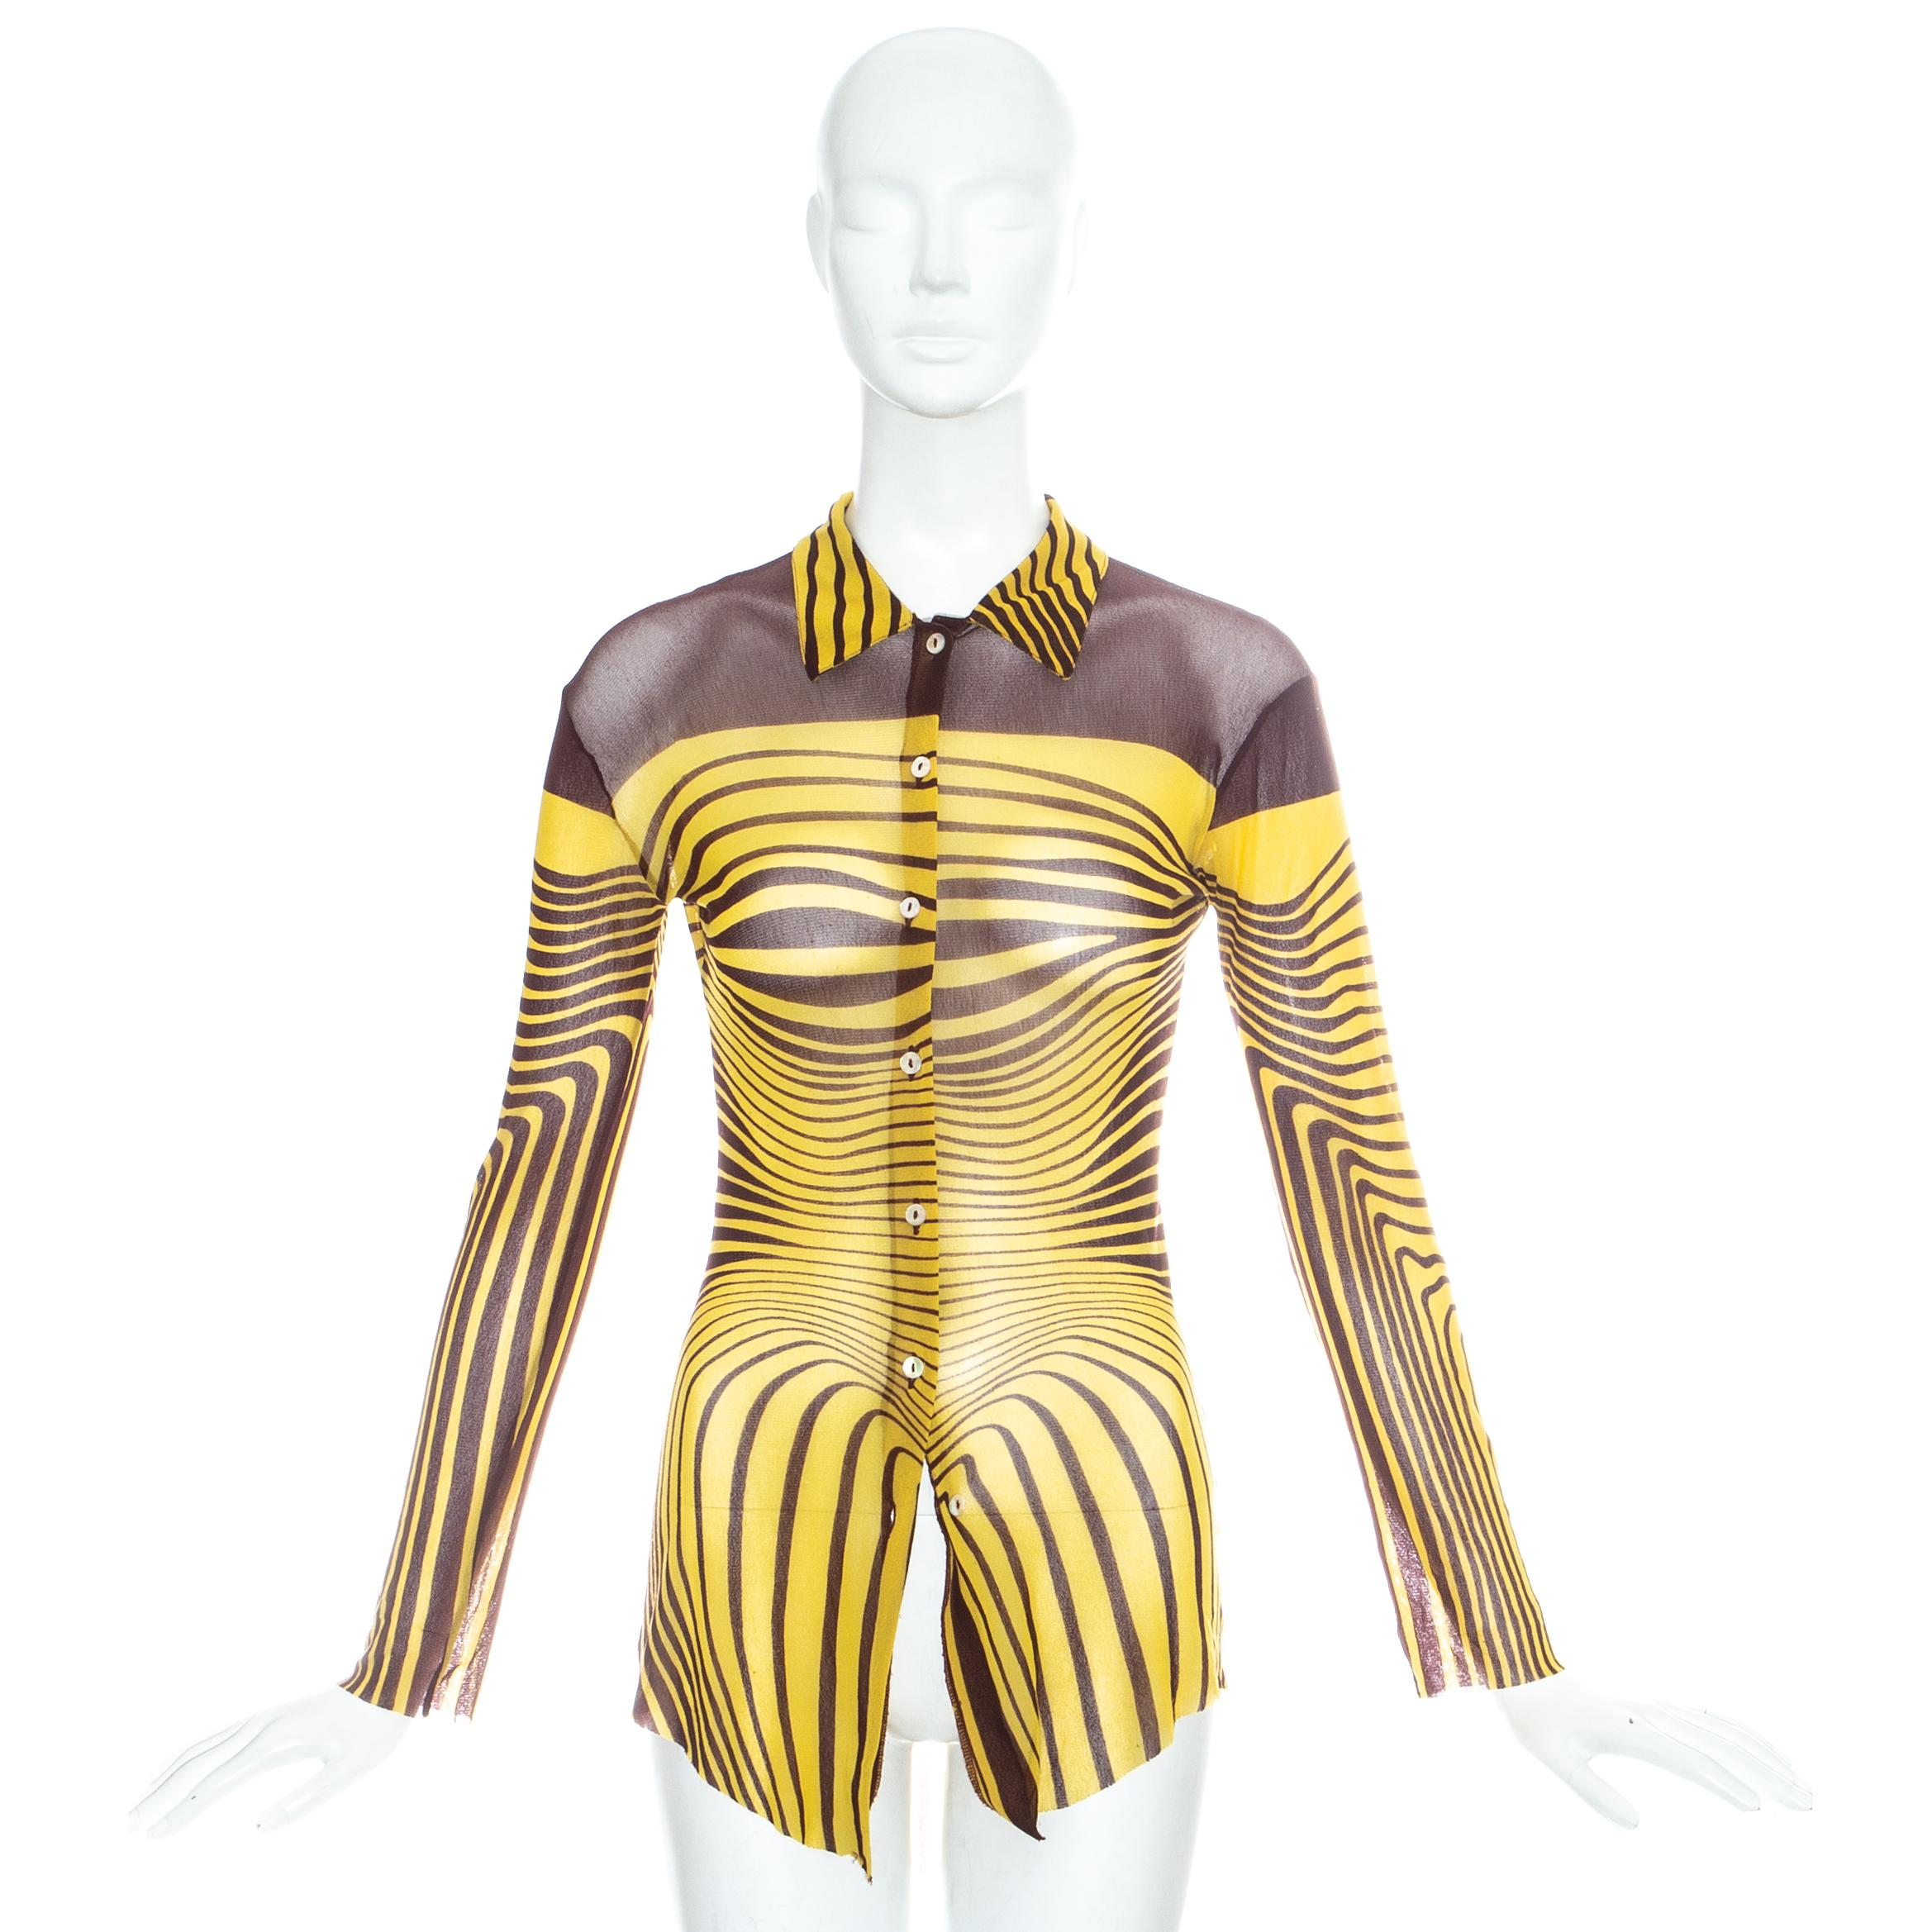 Jean Paul Gaultier; yellow and brown optical illusion printed mesh button up shirt

Spring-Summer 1996